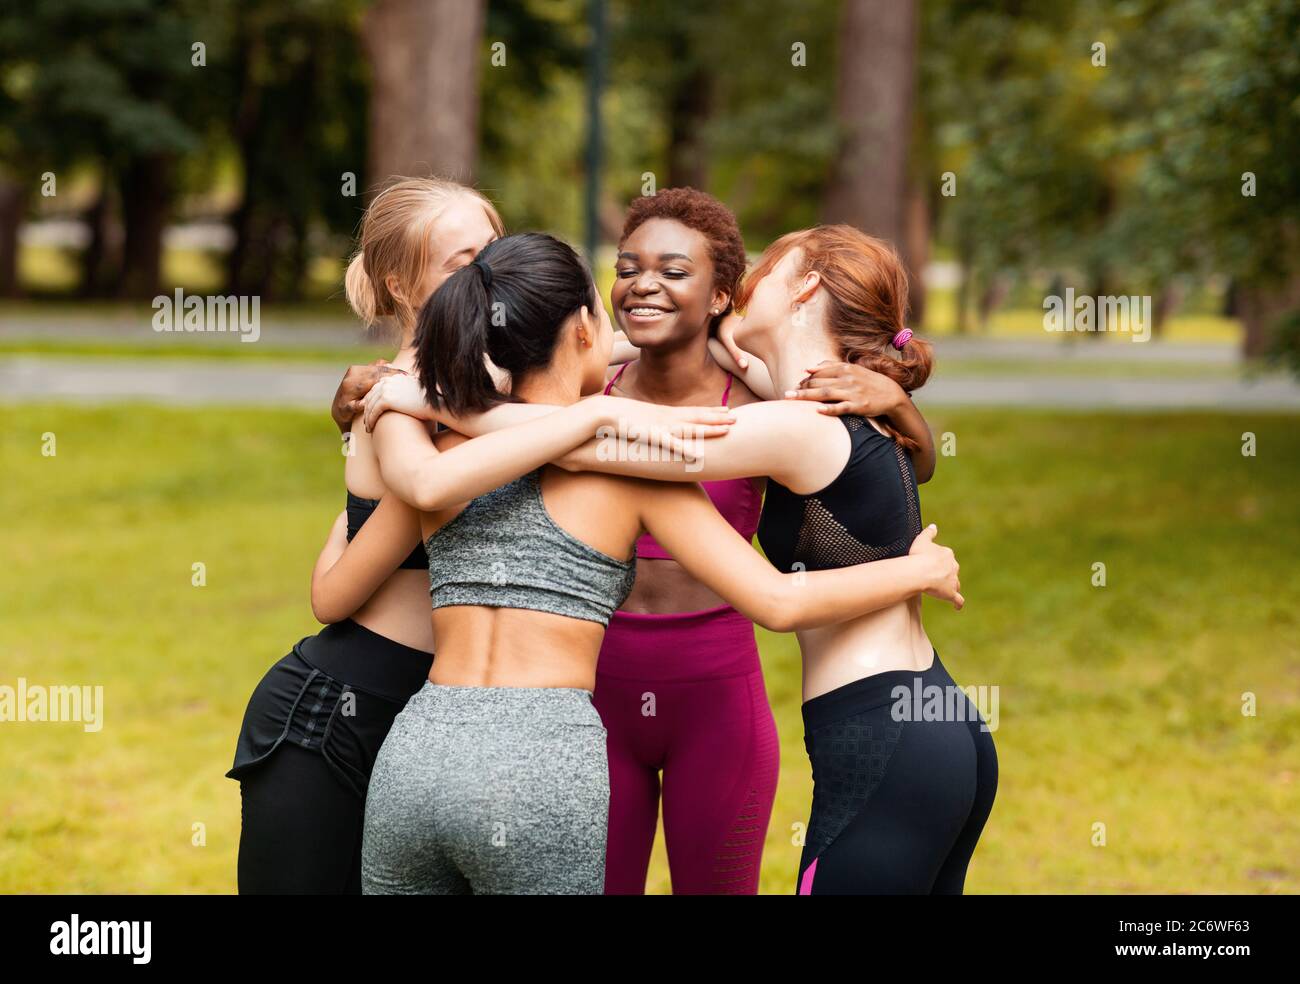 https://c8.alamy.com/comp/2C6WF63/diverse-young-girls-in-sportswear-hugging-after-outdoor-yoga-class-in-park-2C6WF63.jpg